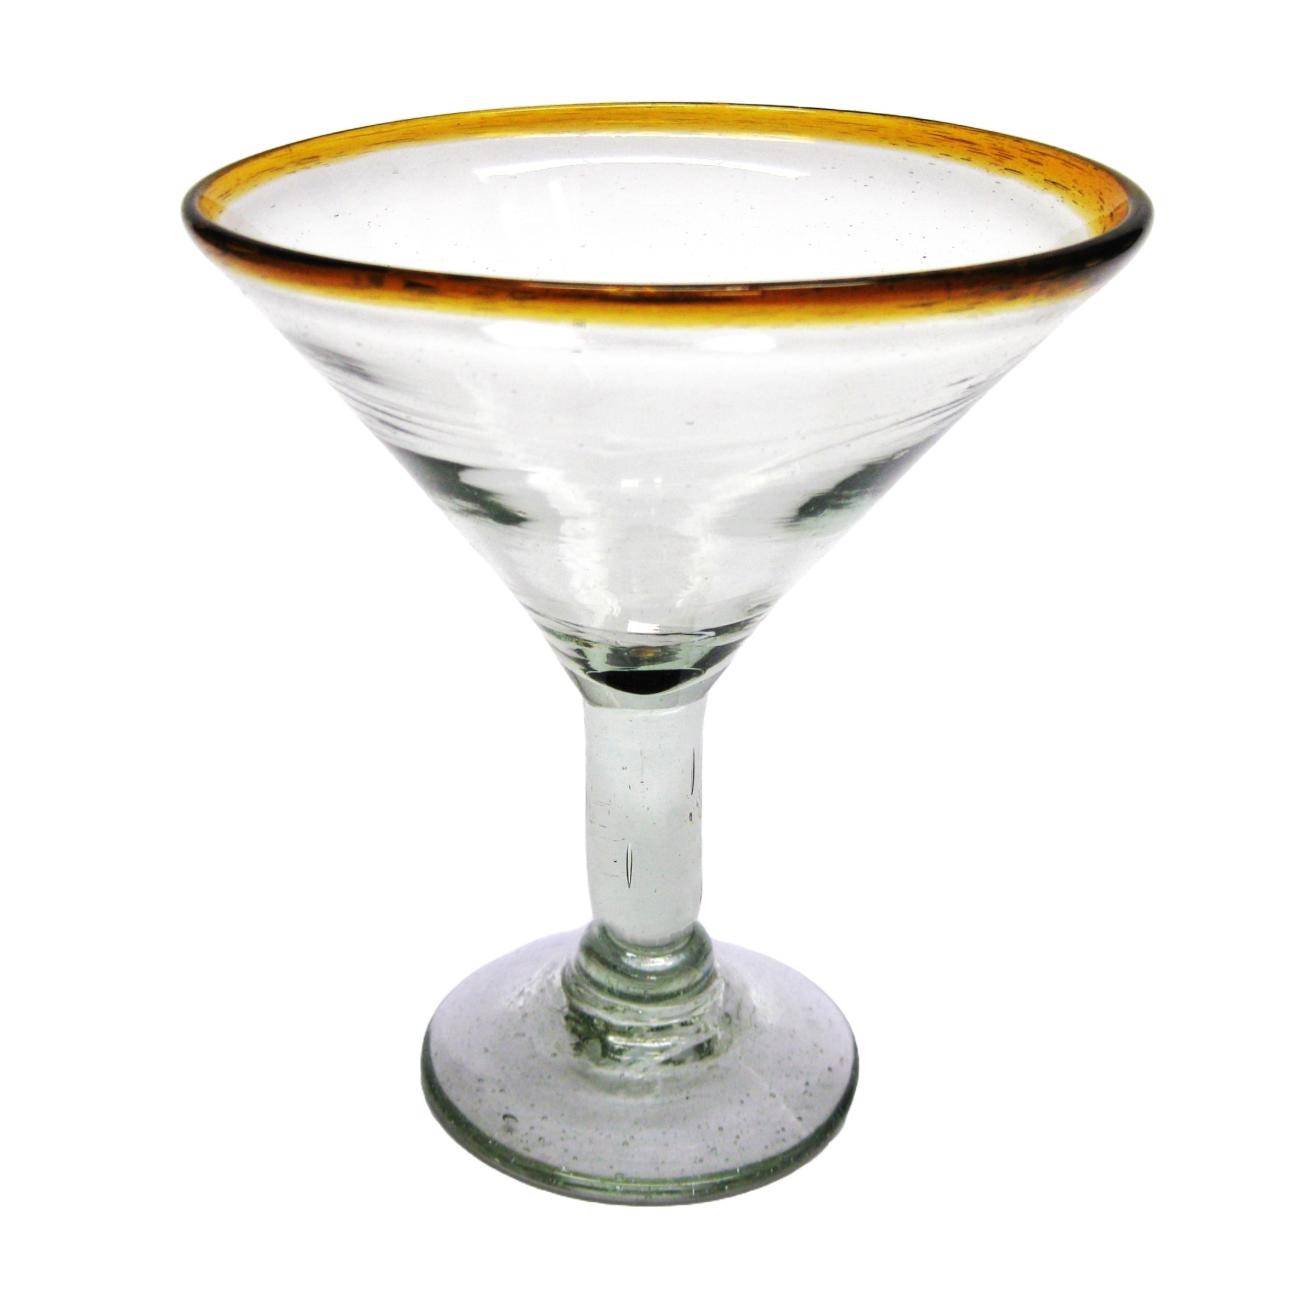 Colored Rim Glassware / Amber Rim 10 oz Martini Glasses (set of 6) / This wonderful set of martini glasses will bring a classic, mexican touch to your parties.